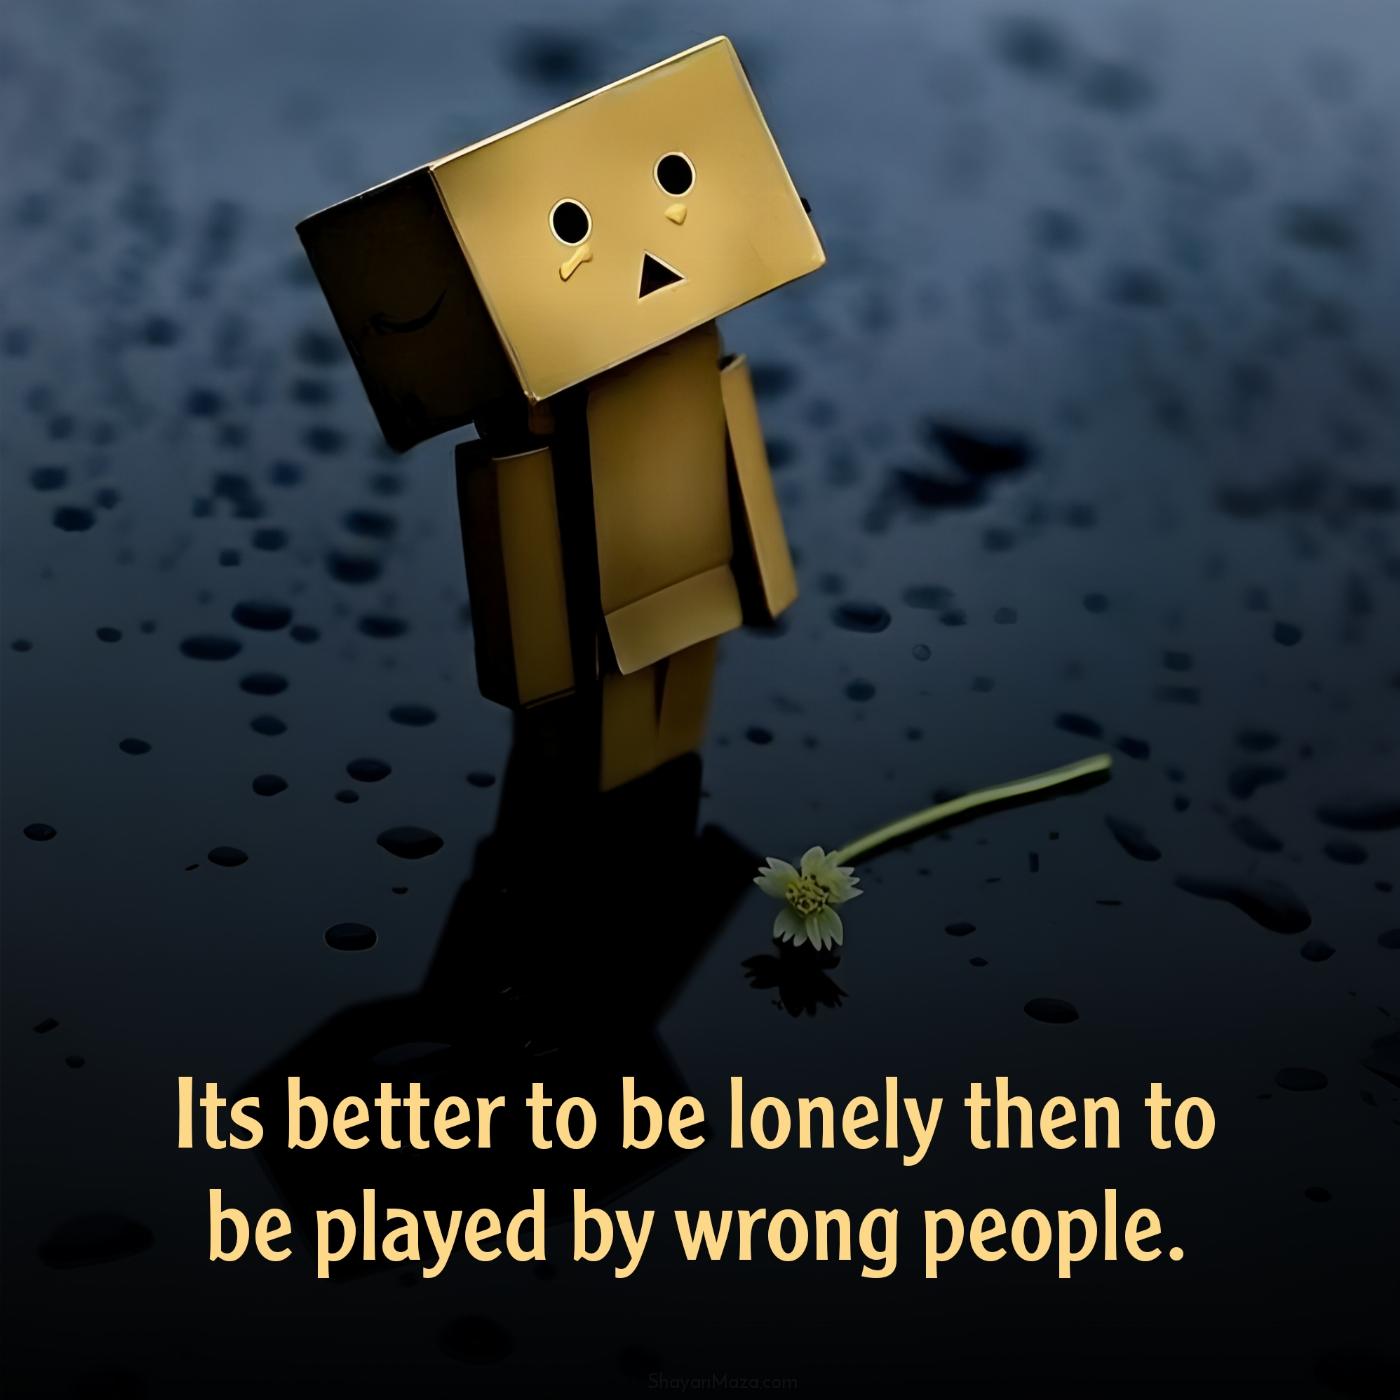 Its better to be lonely then to be played by wrong people